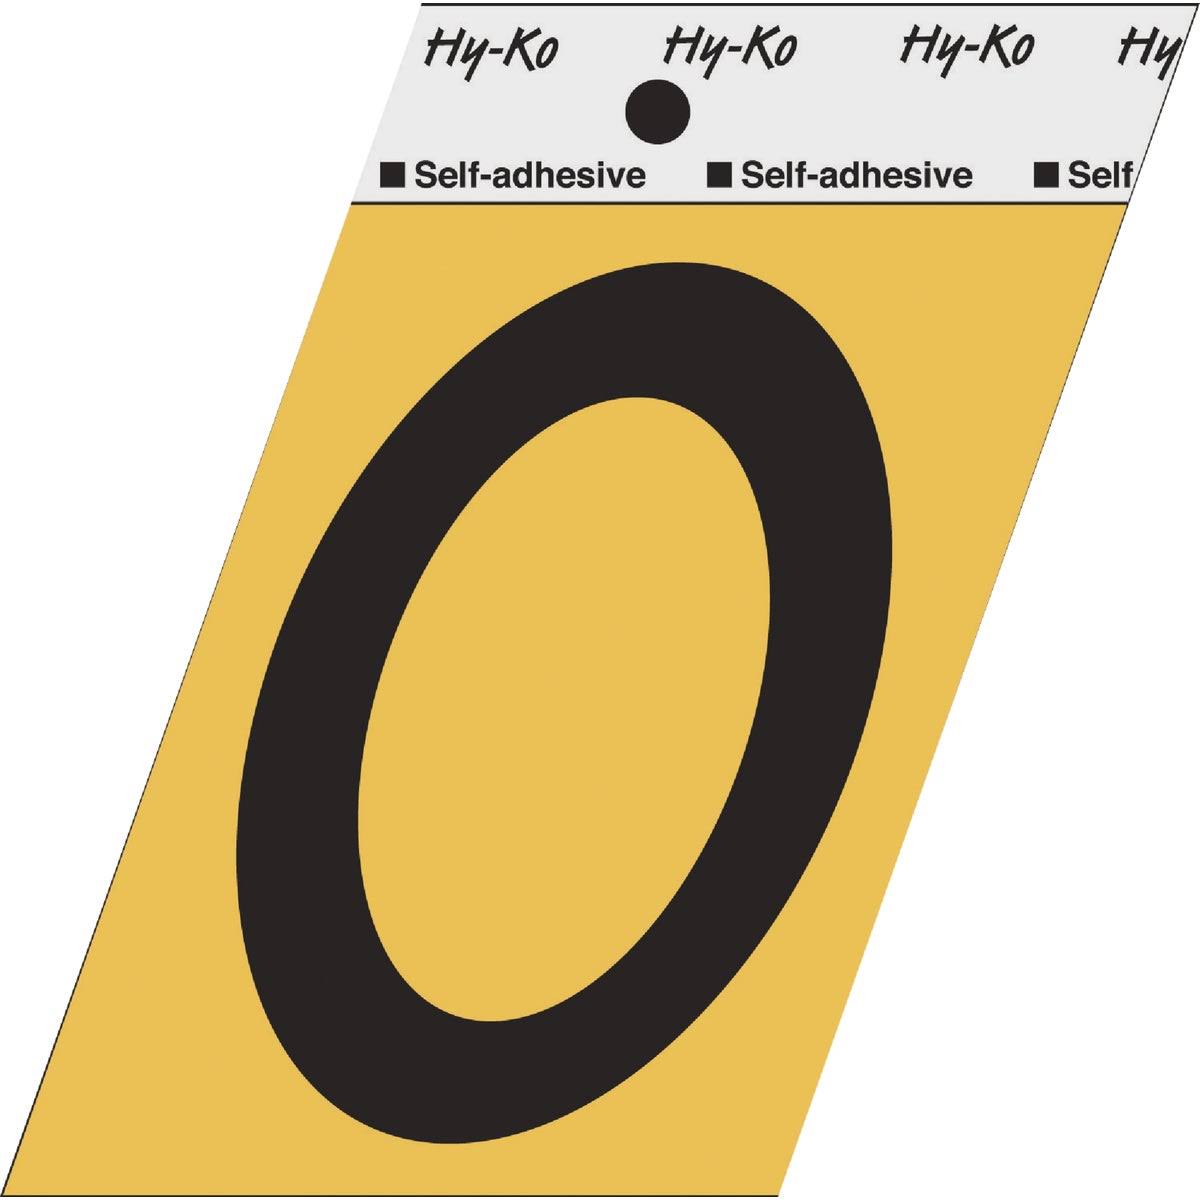 Hy-Ko Aluminum 3-1/2 In. Non-Reflective Adhesive Number Zero GG-25/0 Pack of 10